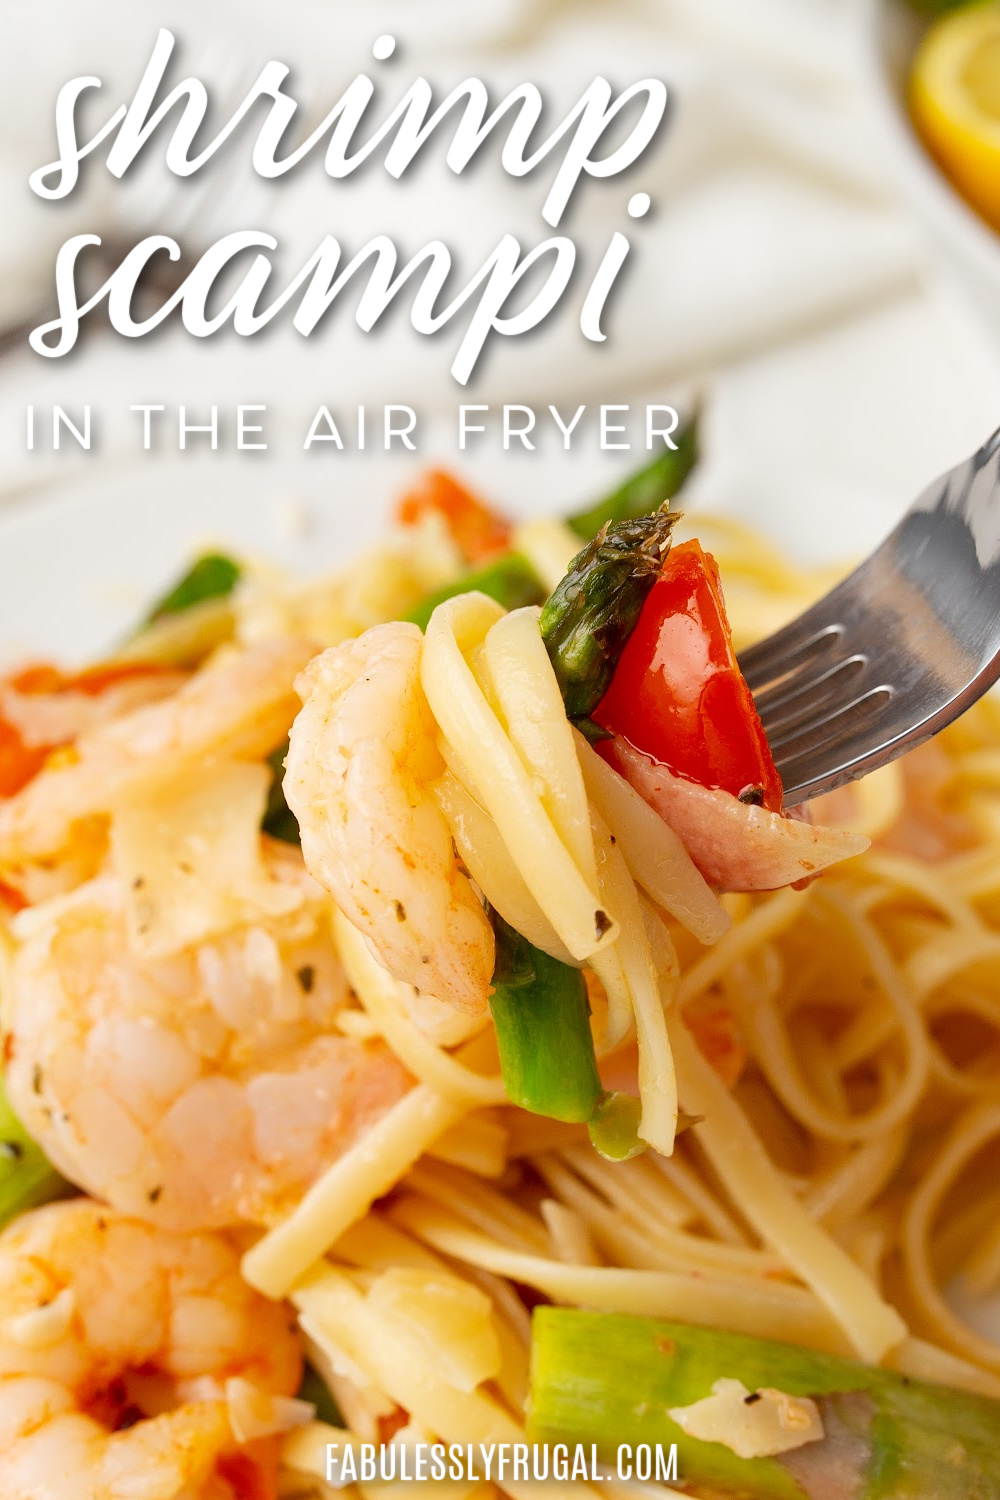 shrimp scampi dish in the air fryer